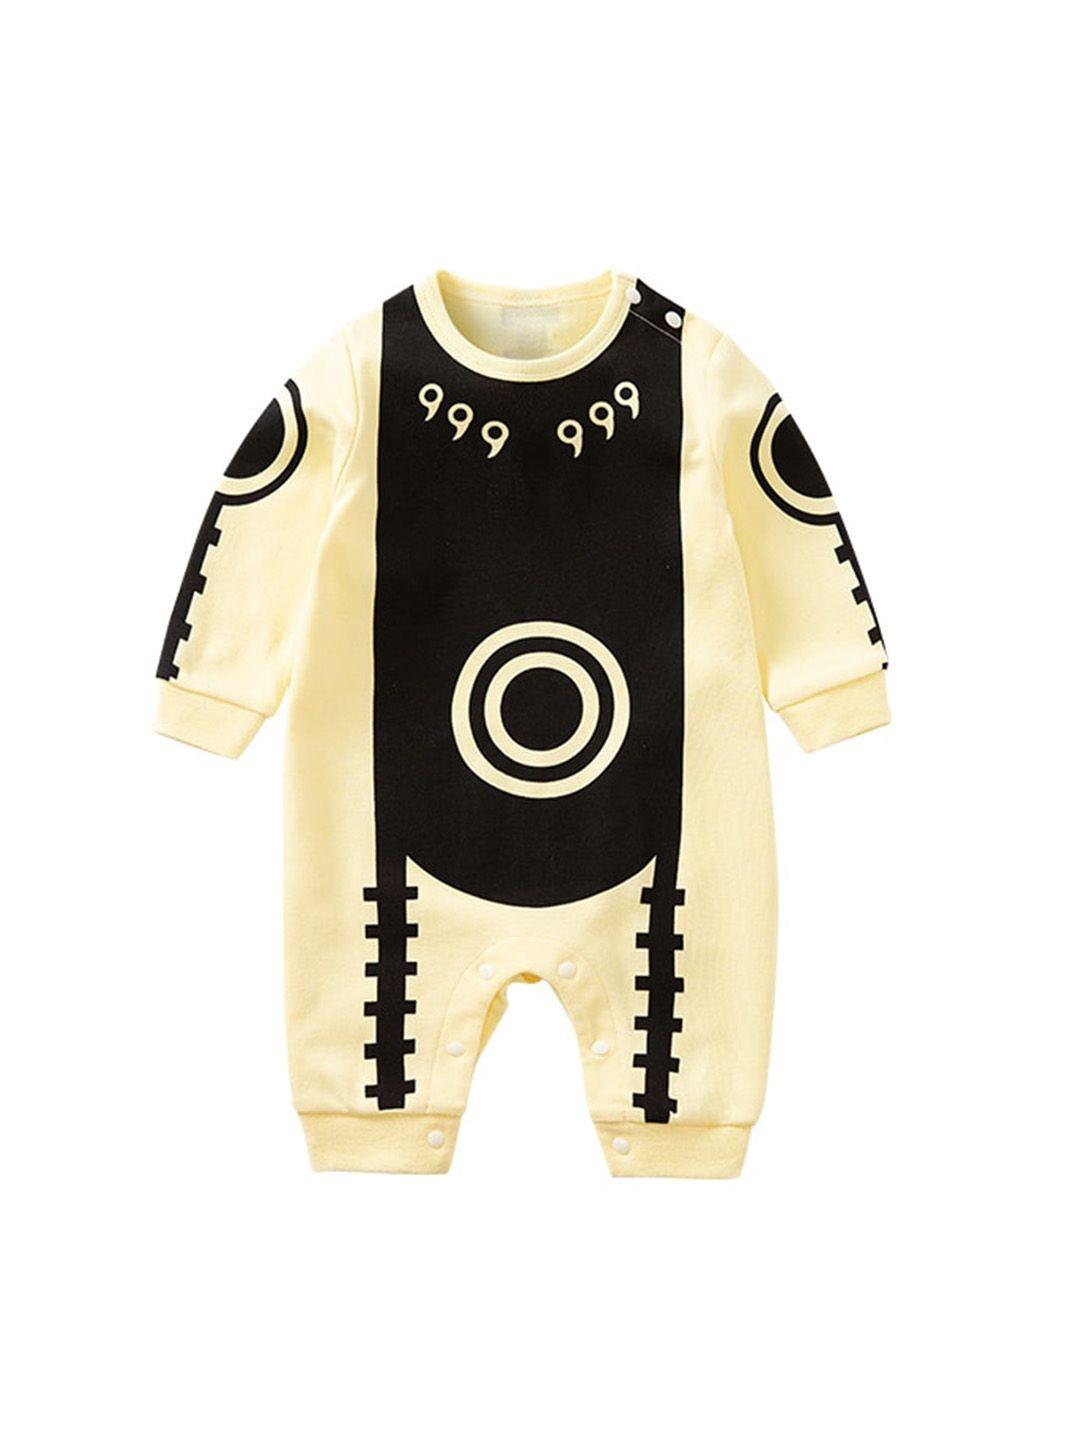 stylecast infant boys yellow printed cotton rompers